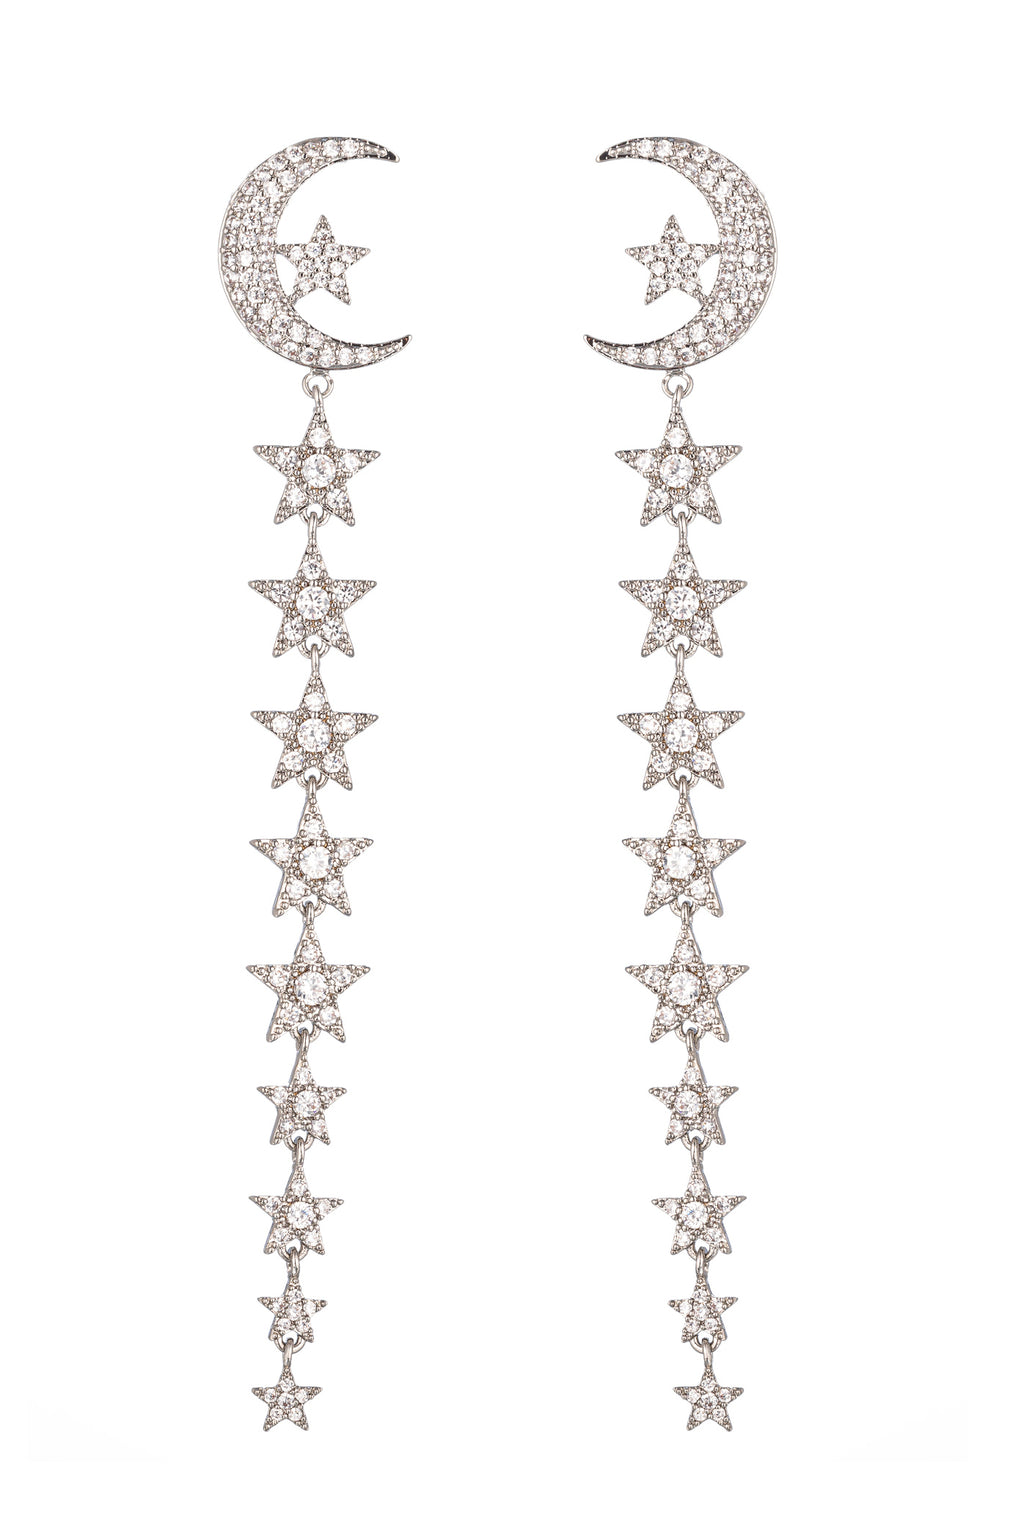 Silver tone brass moon & star long earrings studded with CZ crystals.